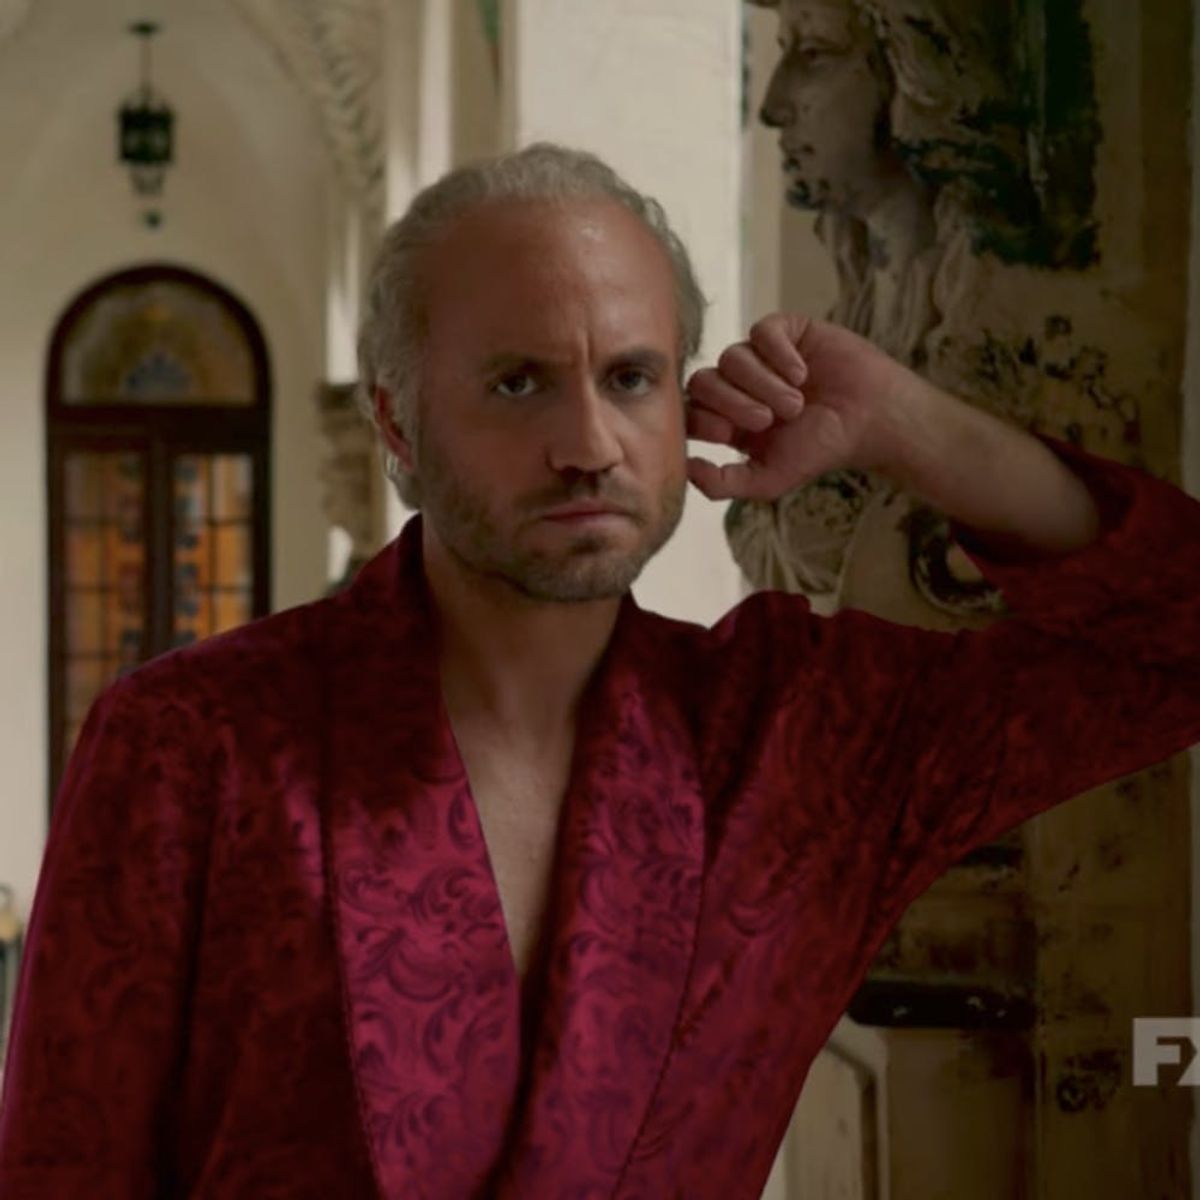 Love True Crime? Watch the Trailer for “The Assassination of Gianni Versace: American Crime Story”